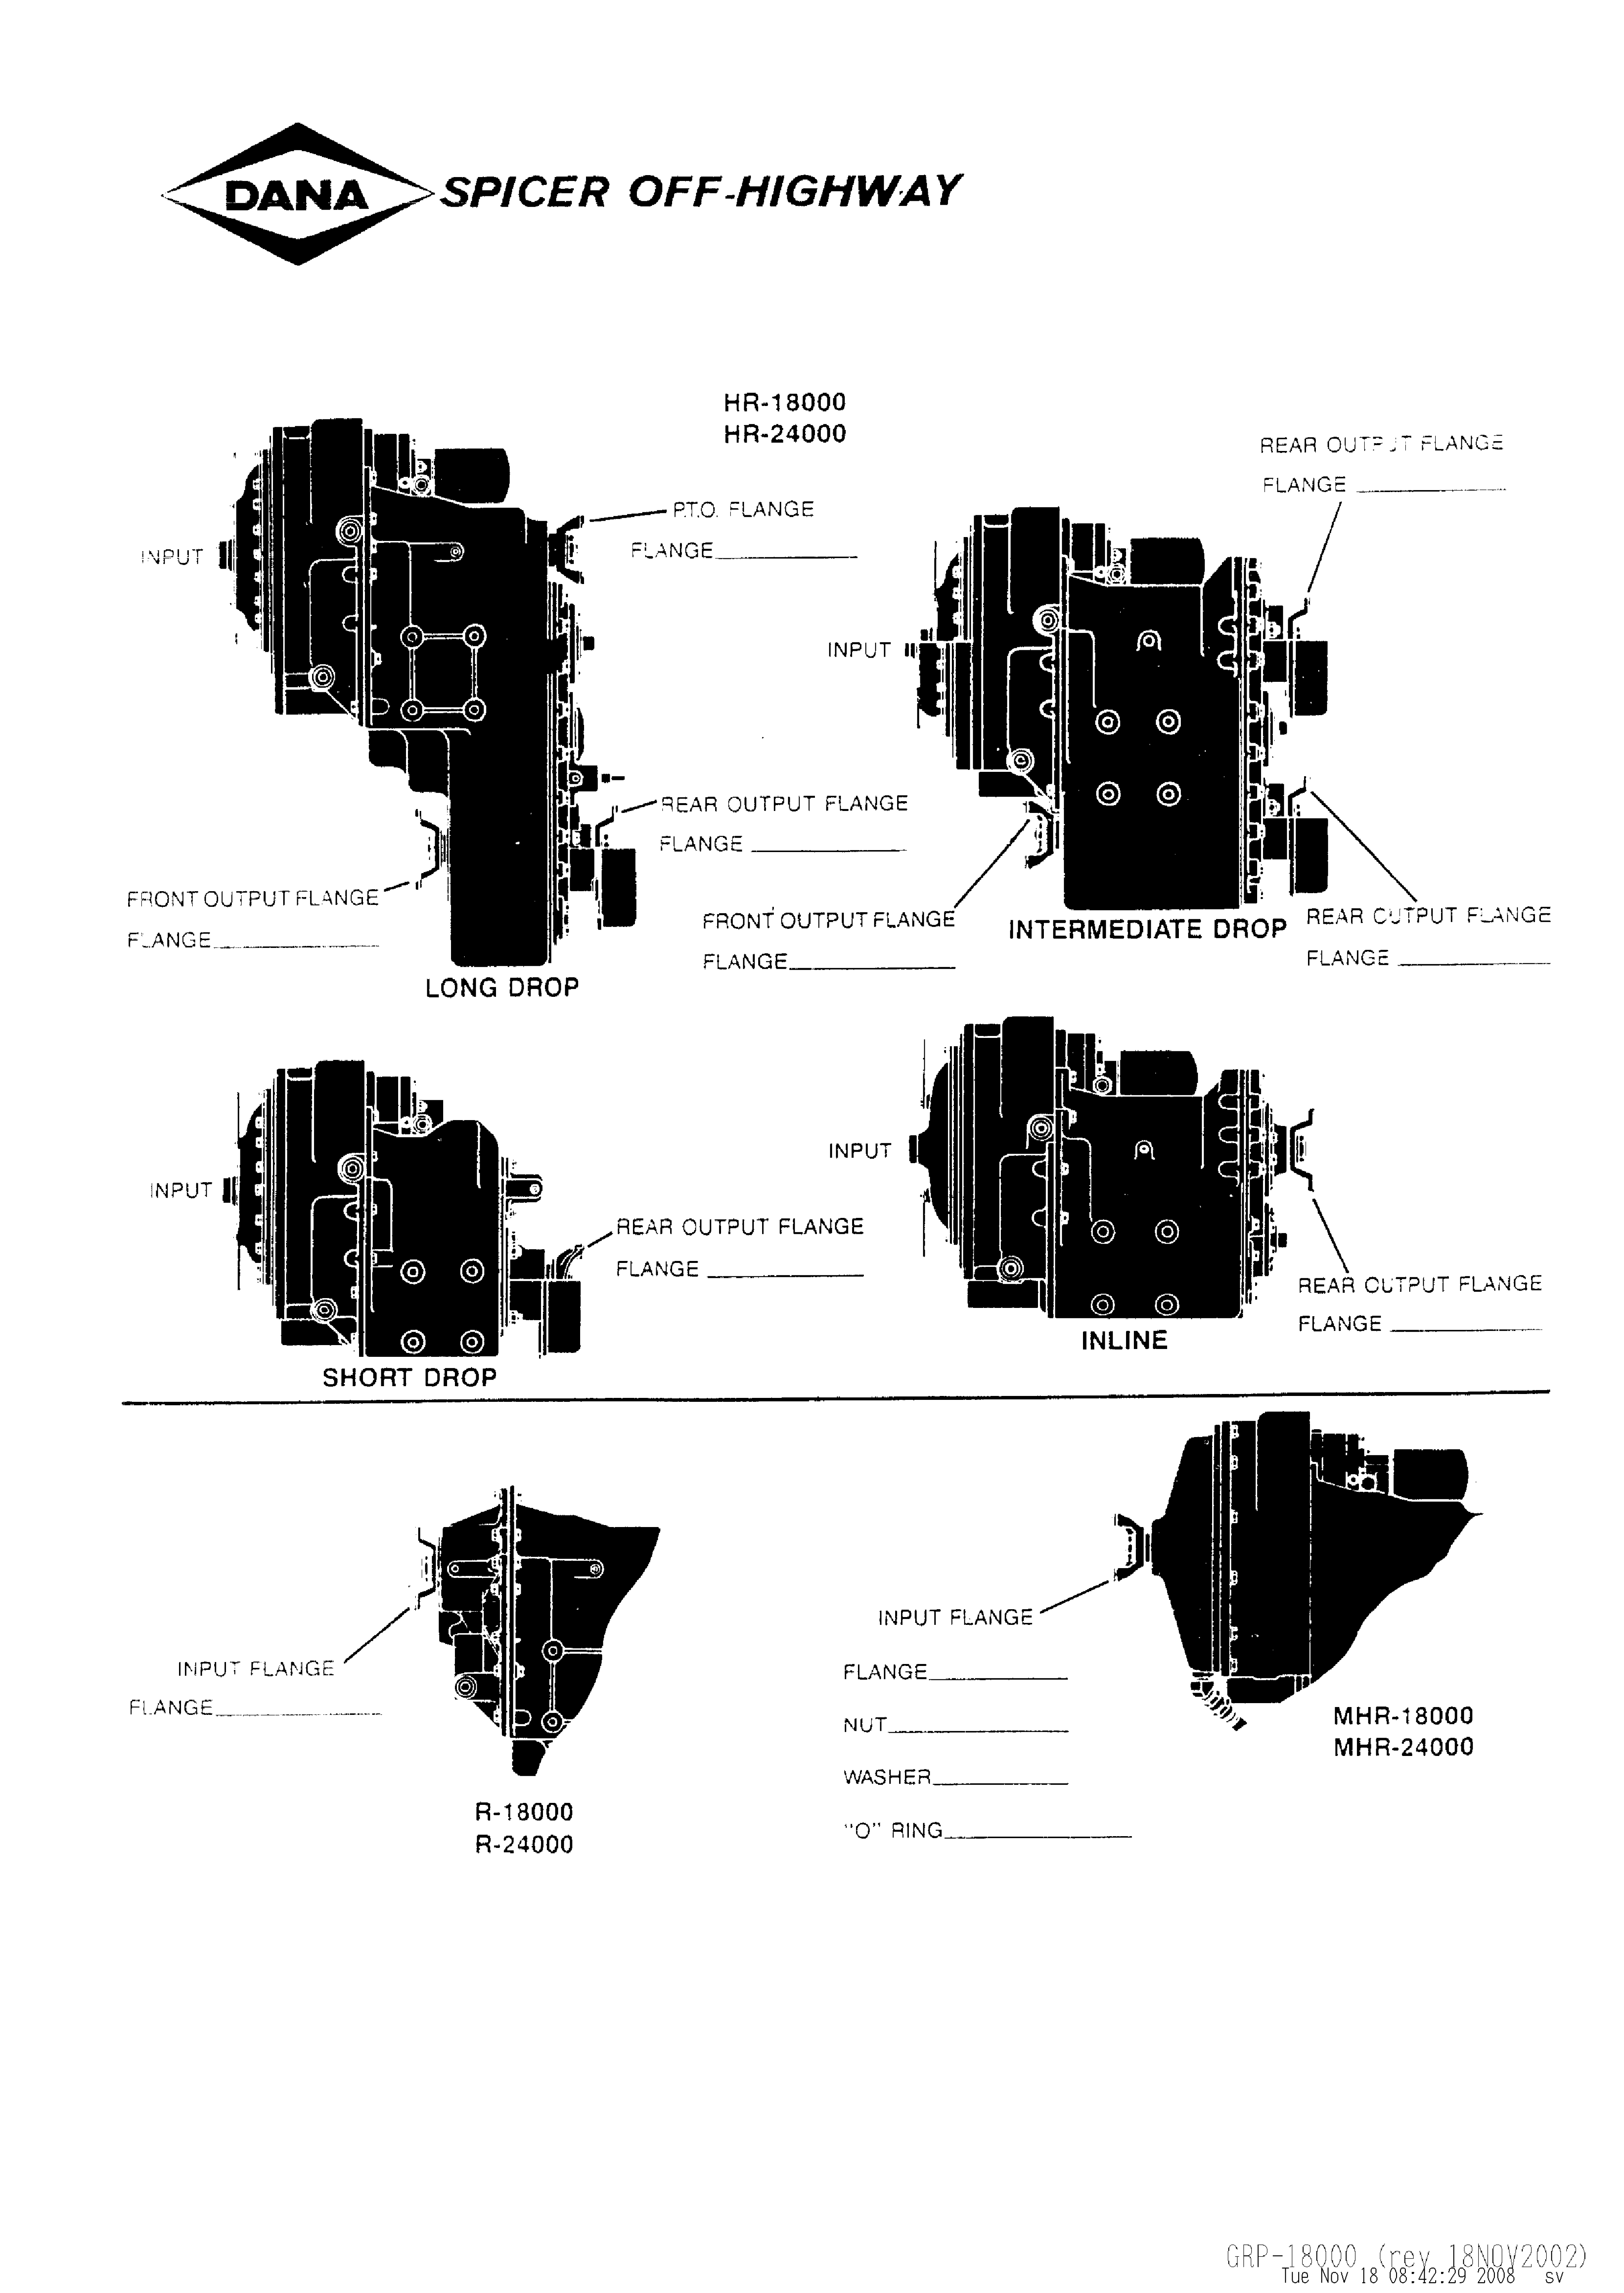 drawing for VALLEE CK231749 - FLANGE (figure 3)